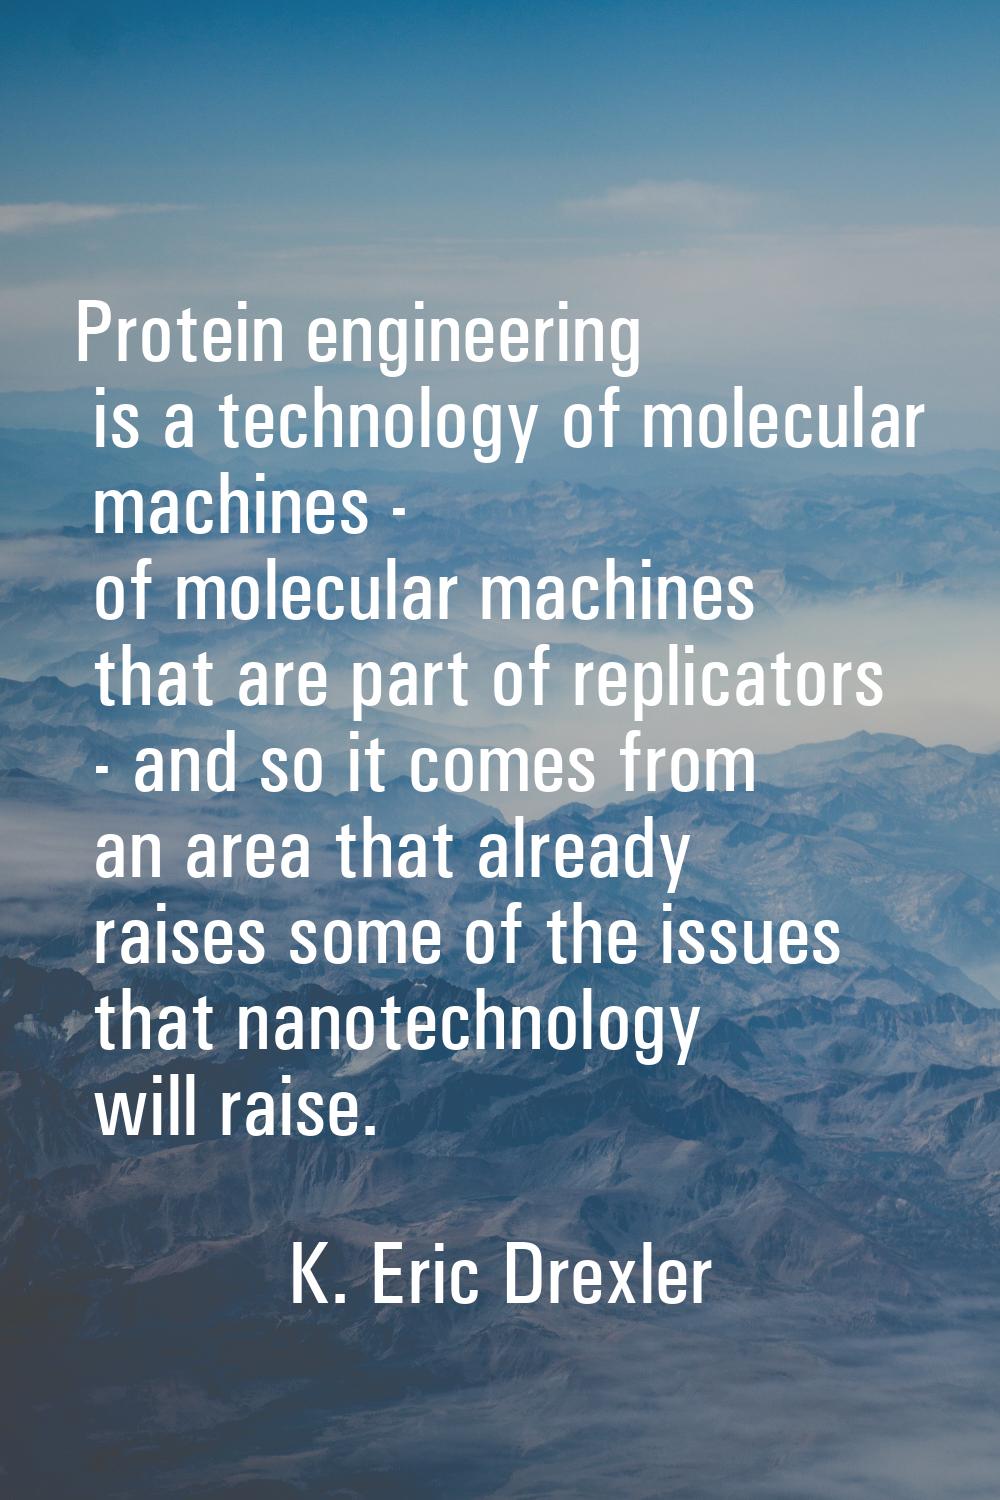 Protein engineering is a technology of molecular machines - of molecular machines that are part of 